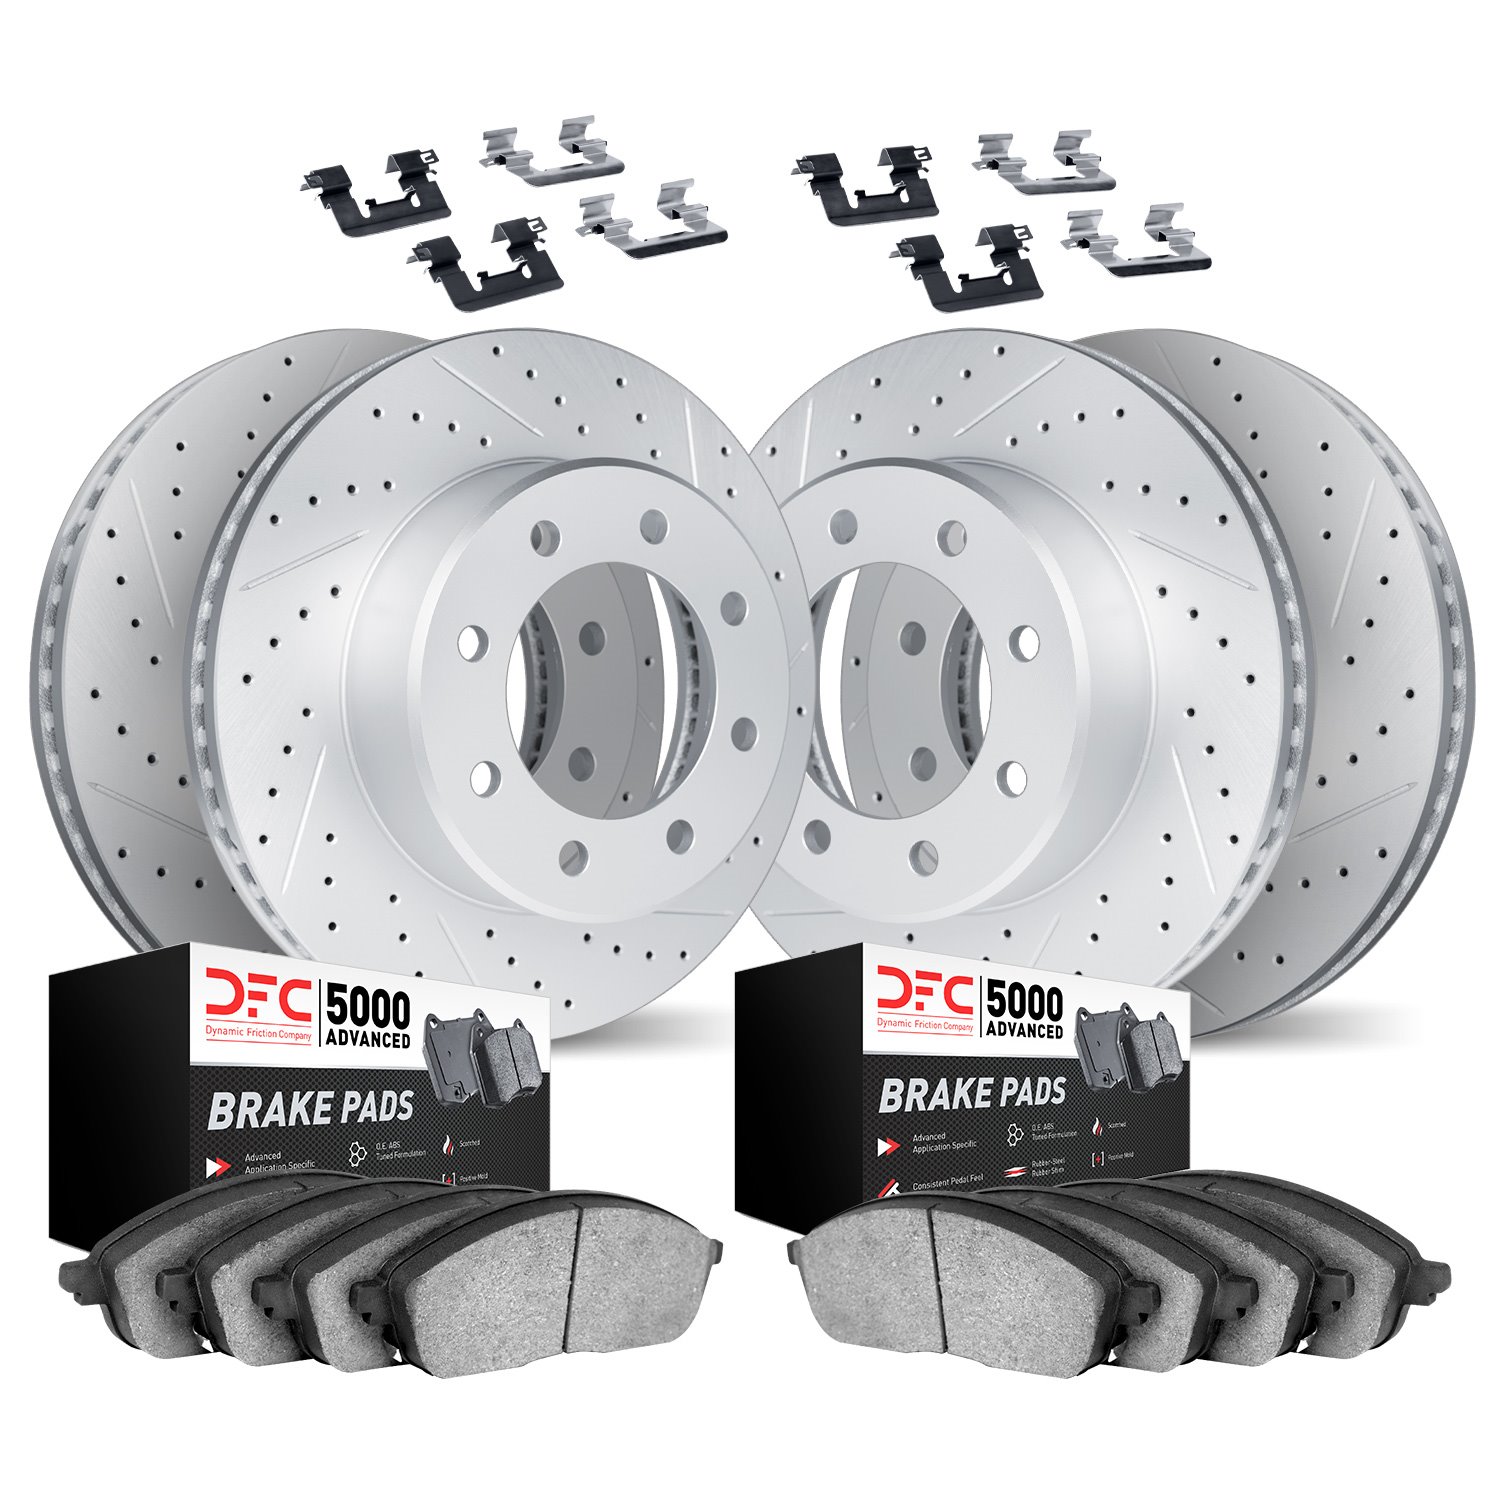 2514-48017 Geoperformance Drilled/Slotted Rotors w/5000 Advanced Brake Pads Kit & Hardware, 2001-2010 GM, Position: Front and Re